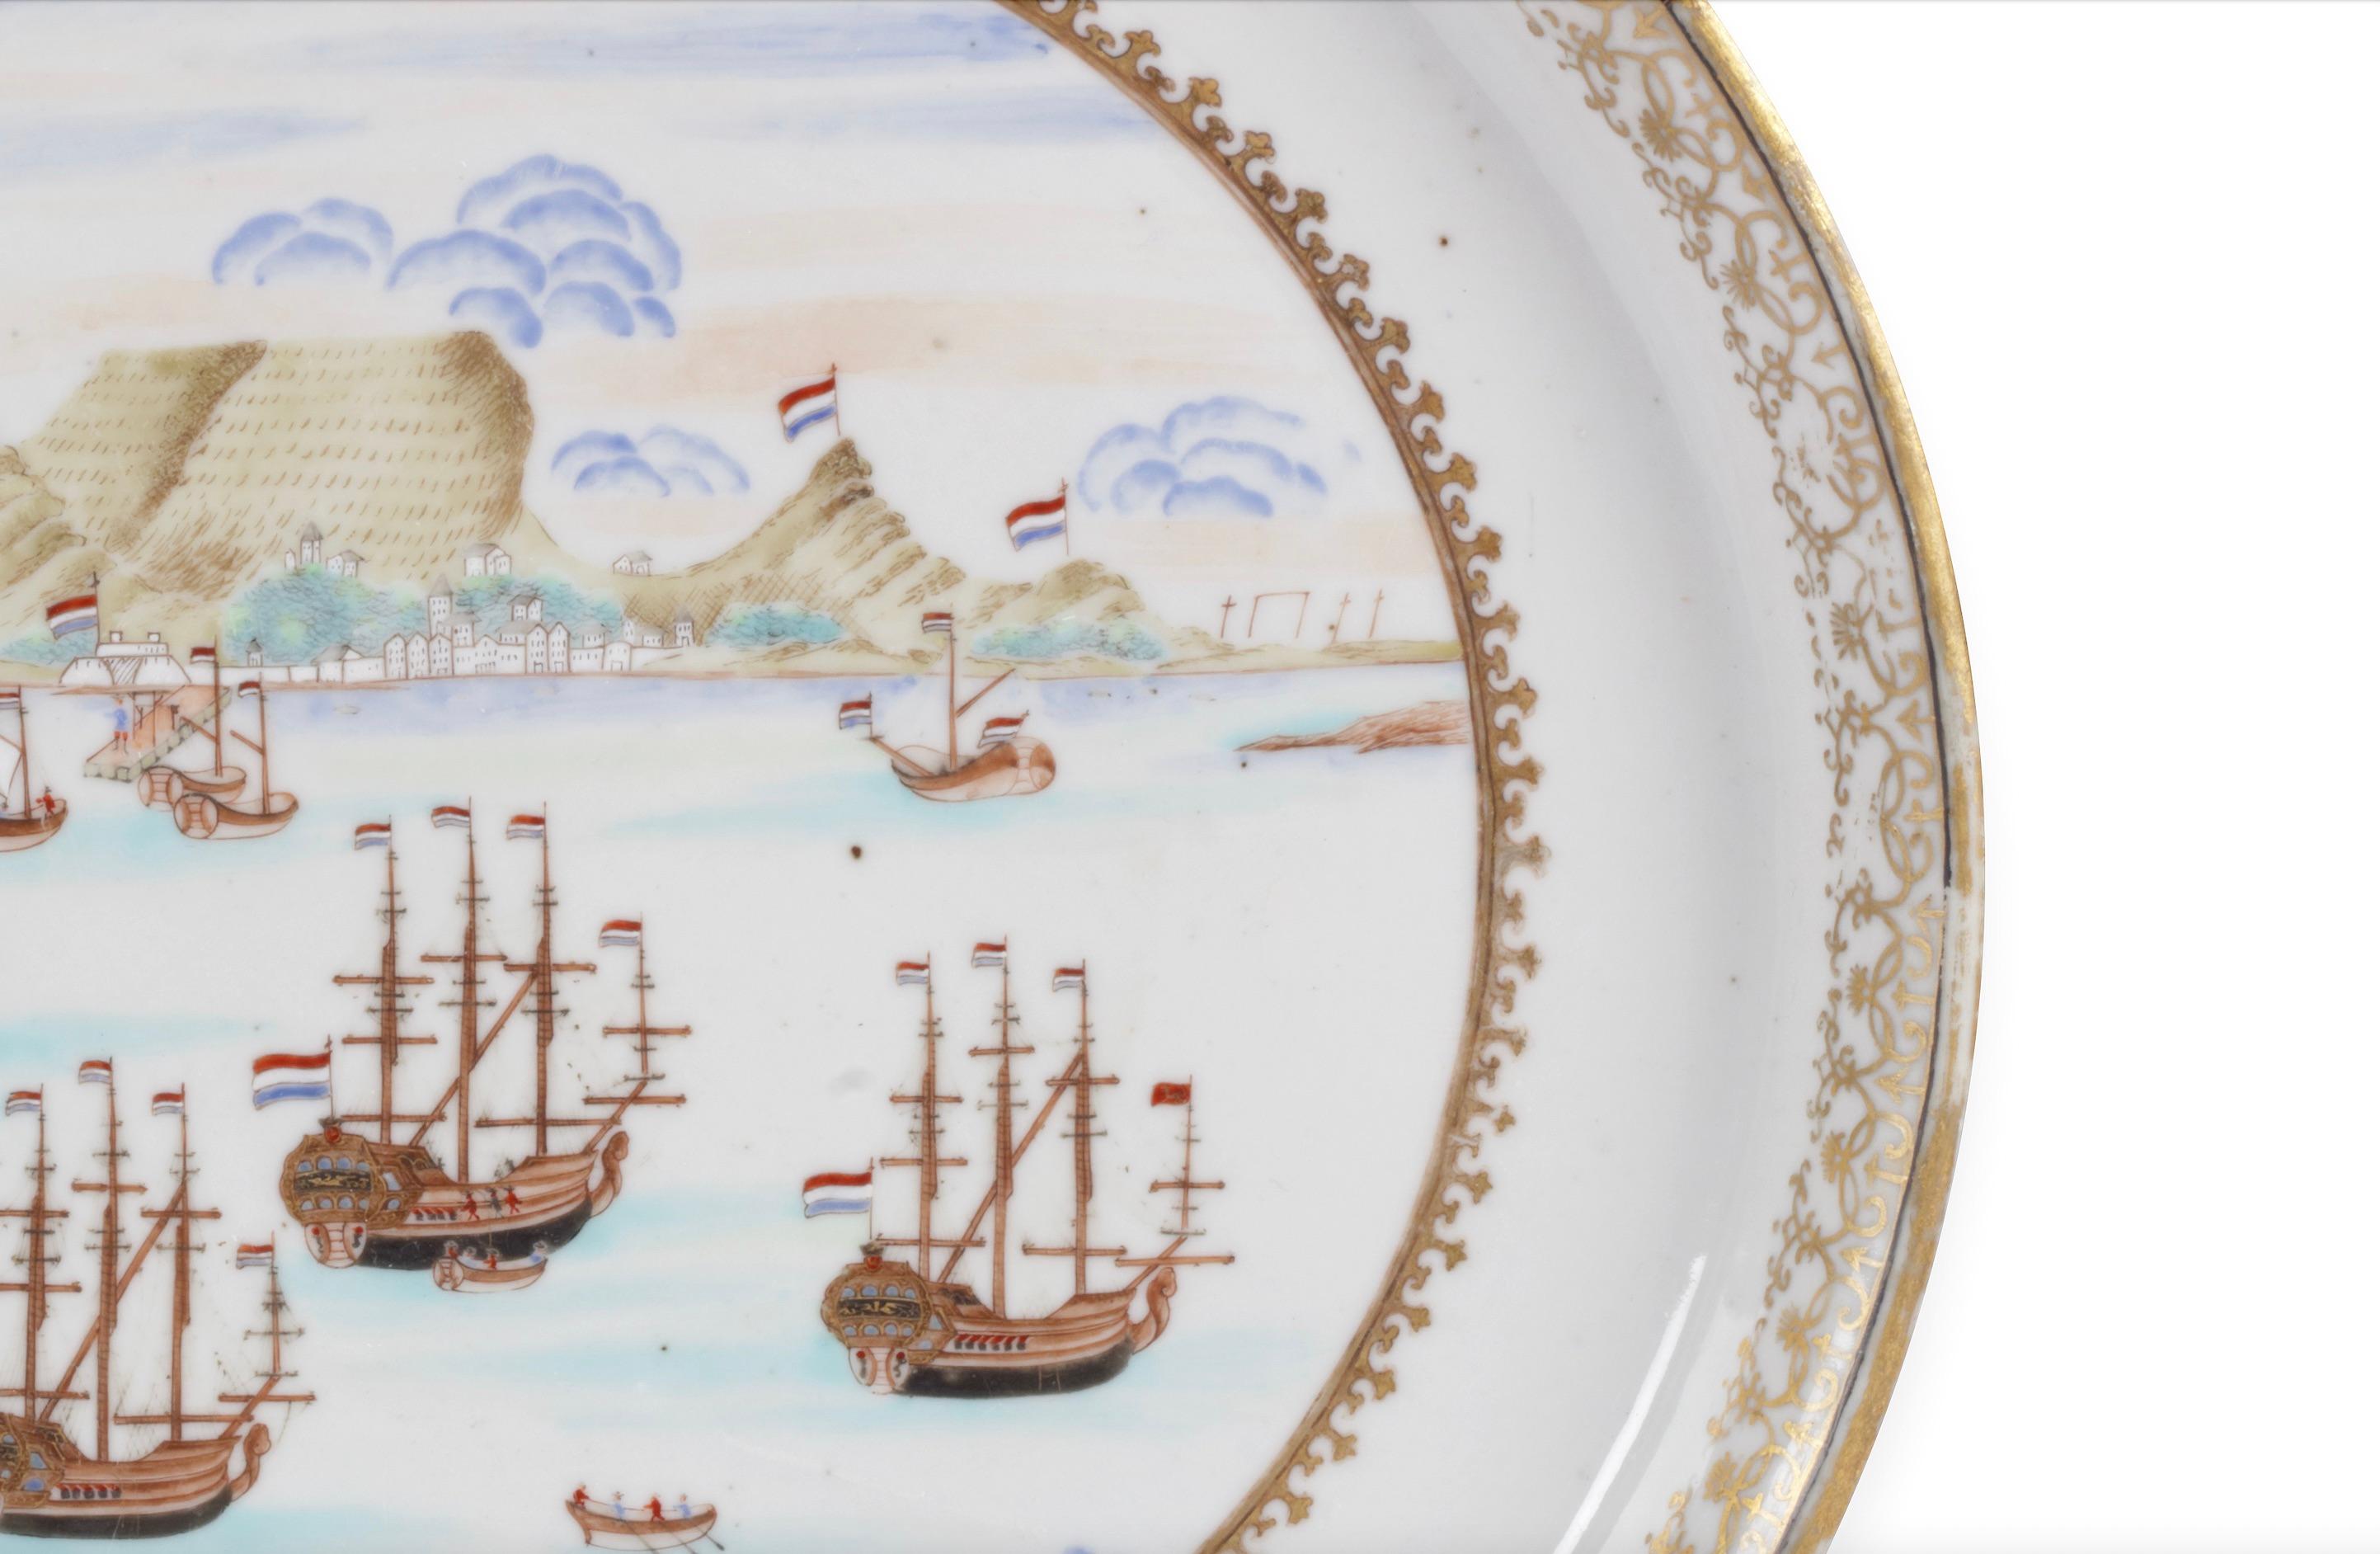 18th Century Rare Large Chinese Export Porcelain 'Table Bay' Cape of Good Hope Dish, C. 1740 For Sale